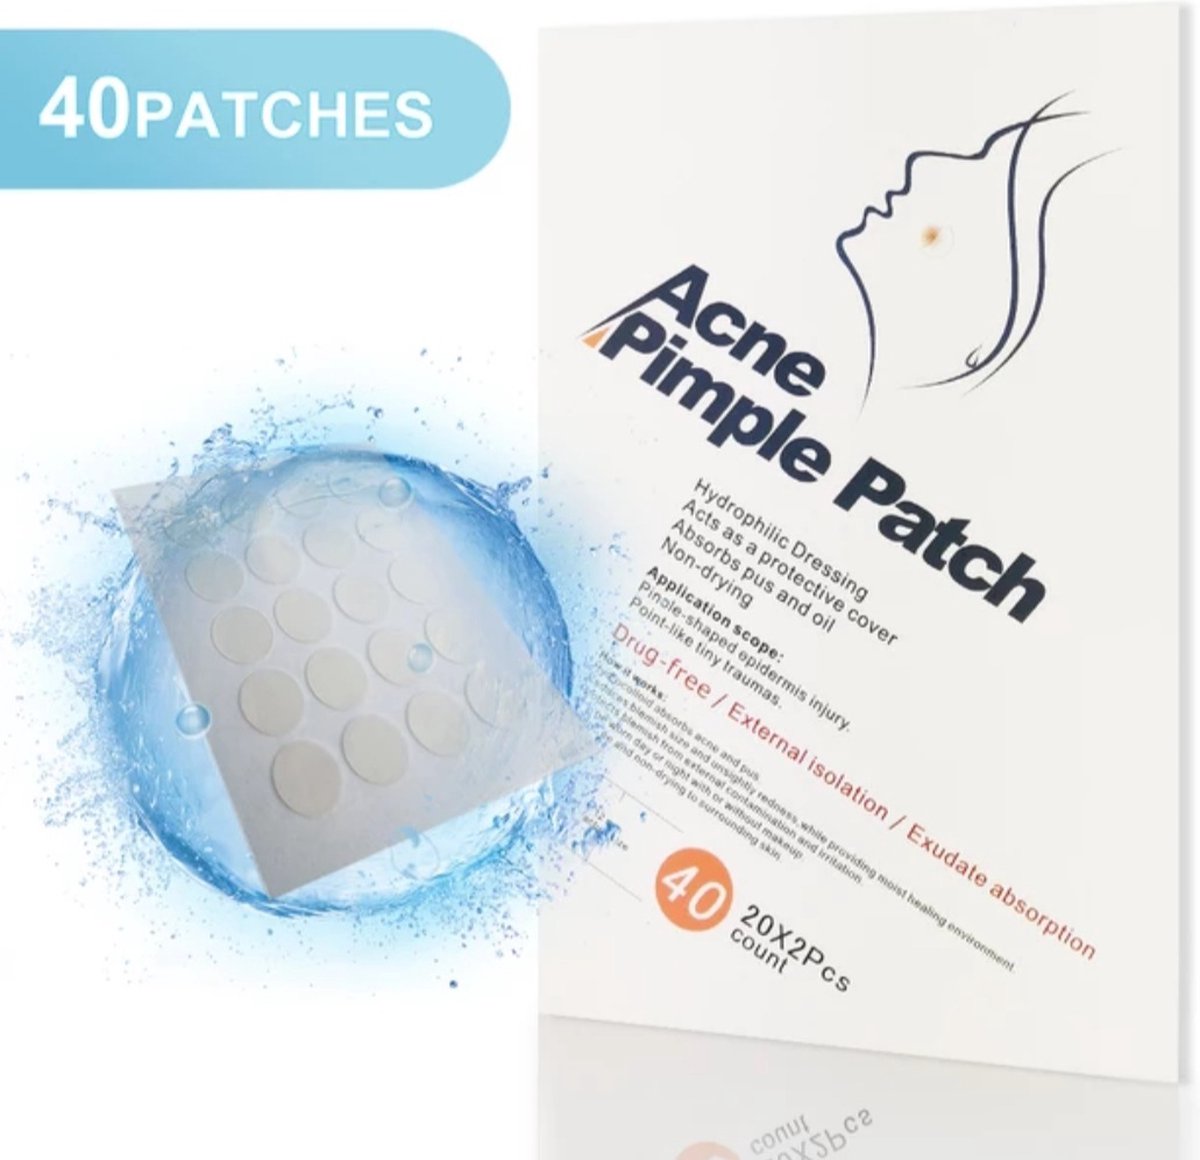 80 patches Acne Patch - Onzichtbaar pleister/Patch hydrogel voor acne - Invisible acne patch - 2 packs/ 4 sheets